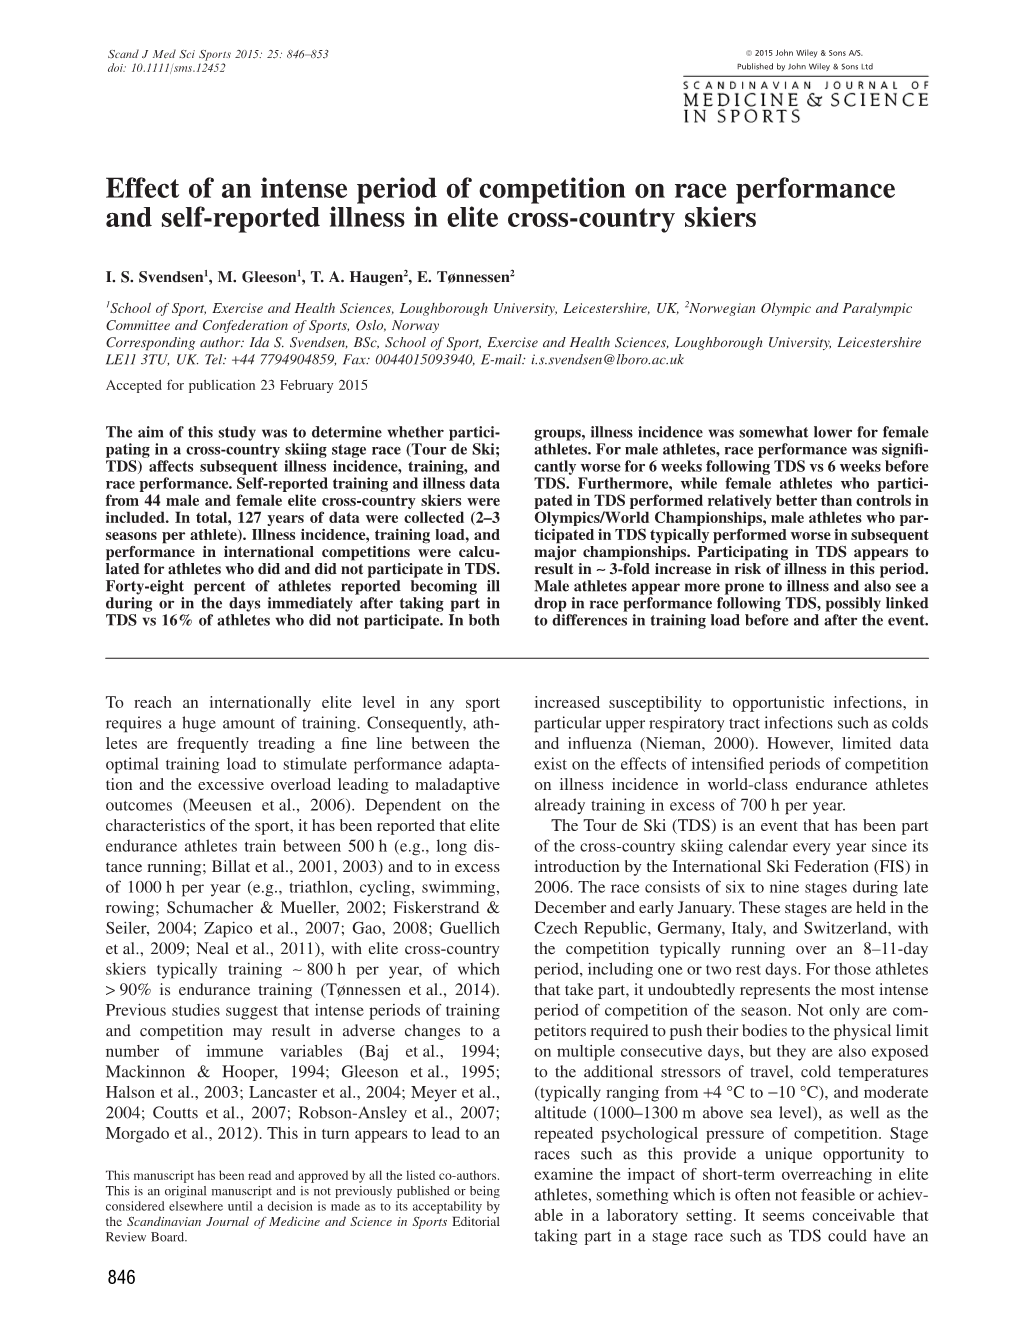 Effect of an Intense Period of Competition on Race Performance and Self-Reported Illness in Elite Cross-Country Skiers